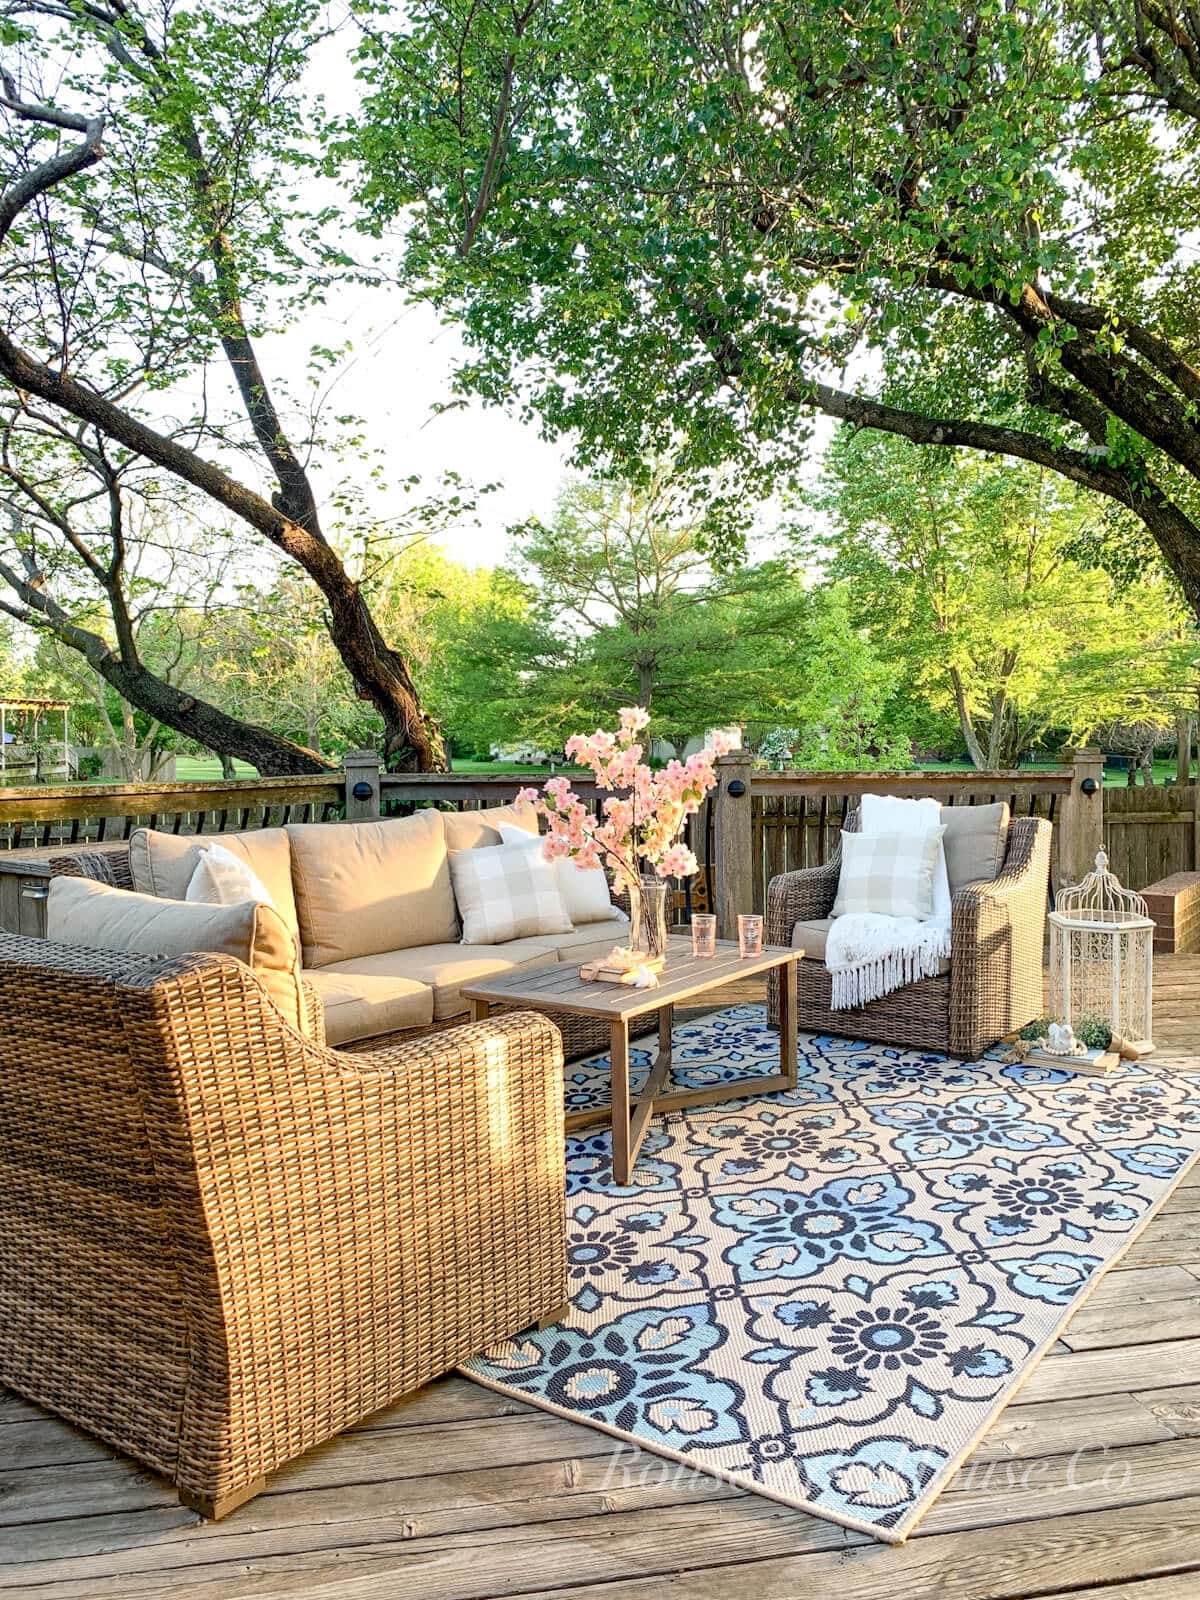 A deck, furnished with outdoor furniture and a large outdoor rug and decorated with throw pillows, a throw blanket and a bird cage as decor.